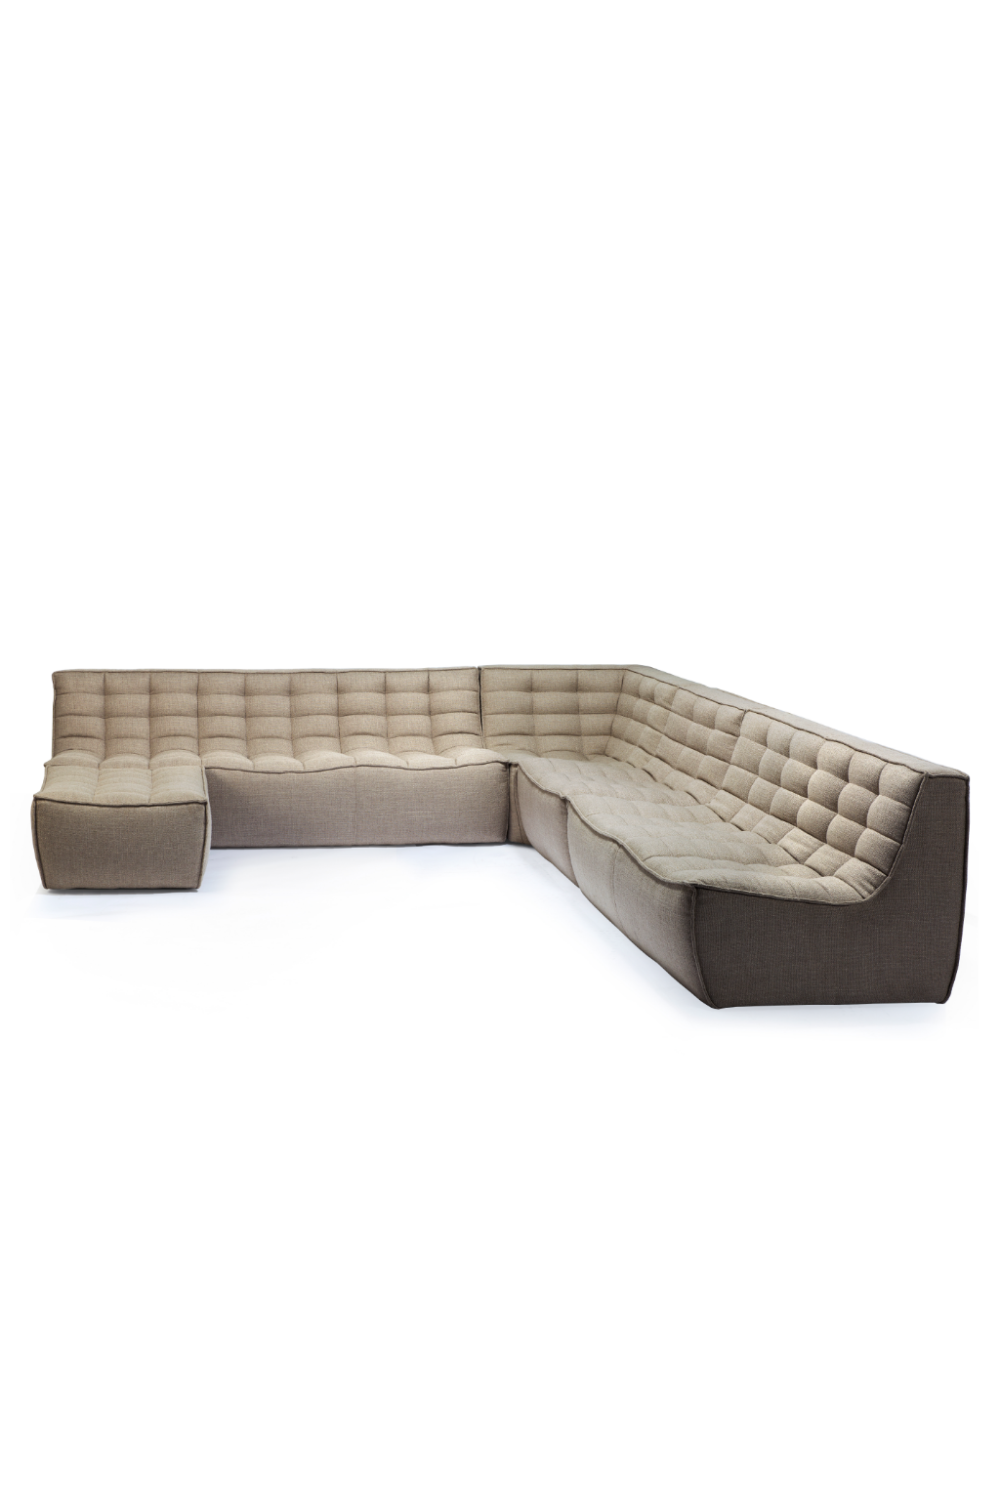 Curved Upholstered Sofa | Ethnicraft N701 | OROA.COM